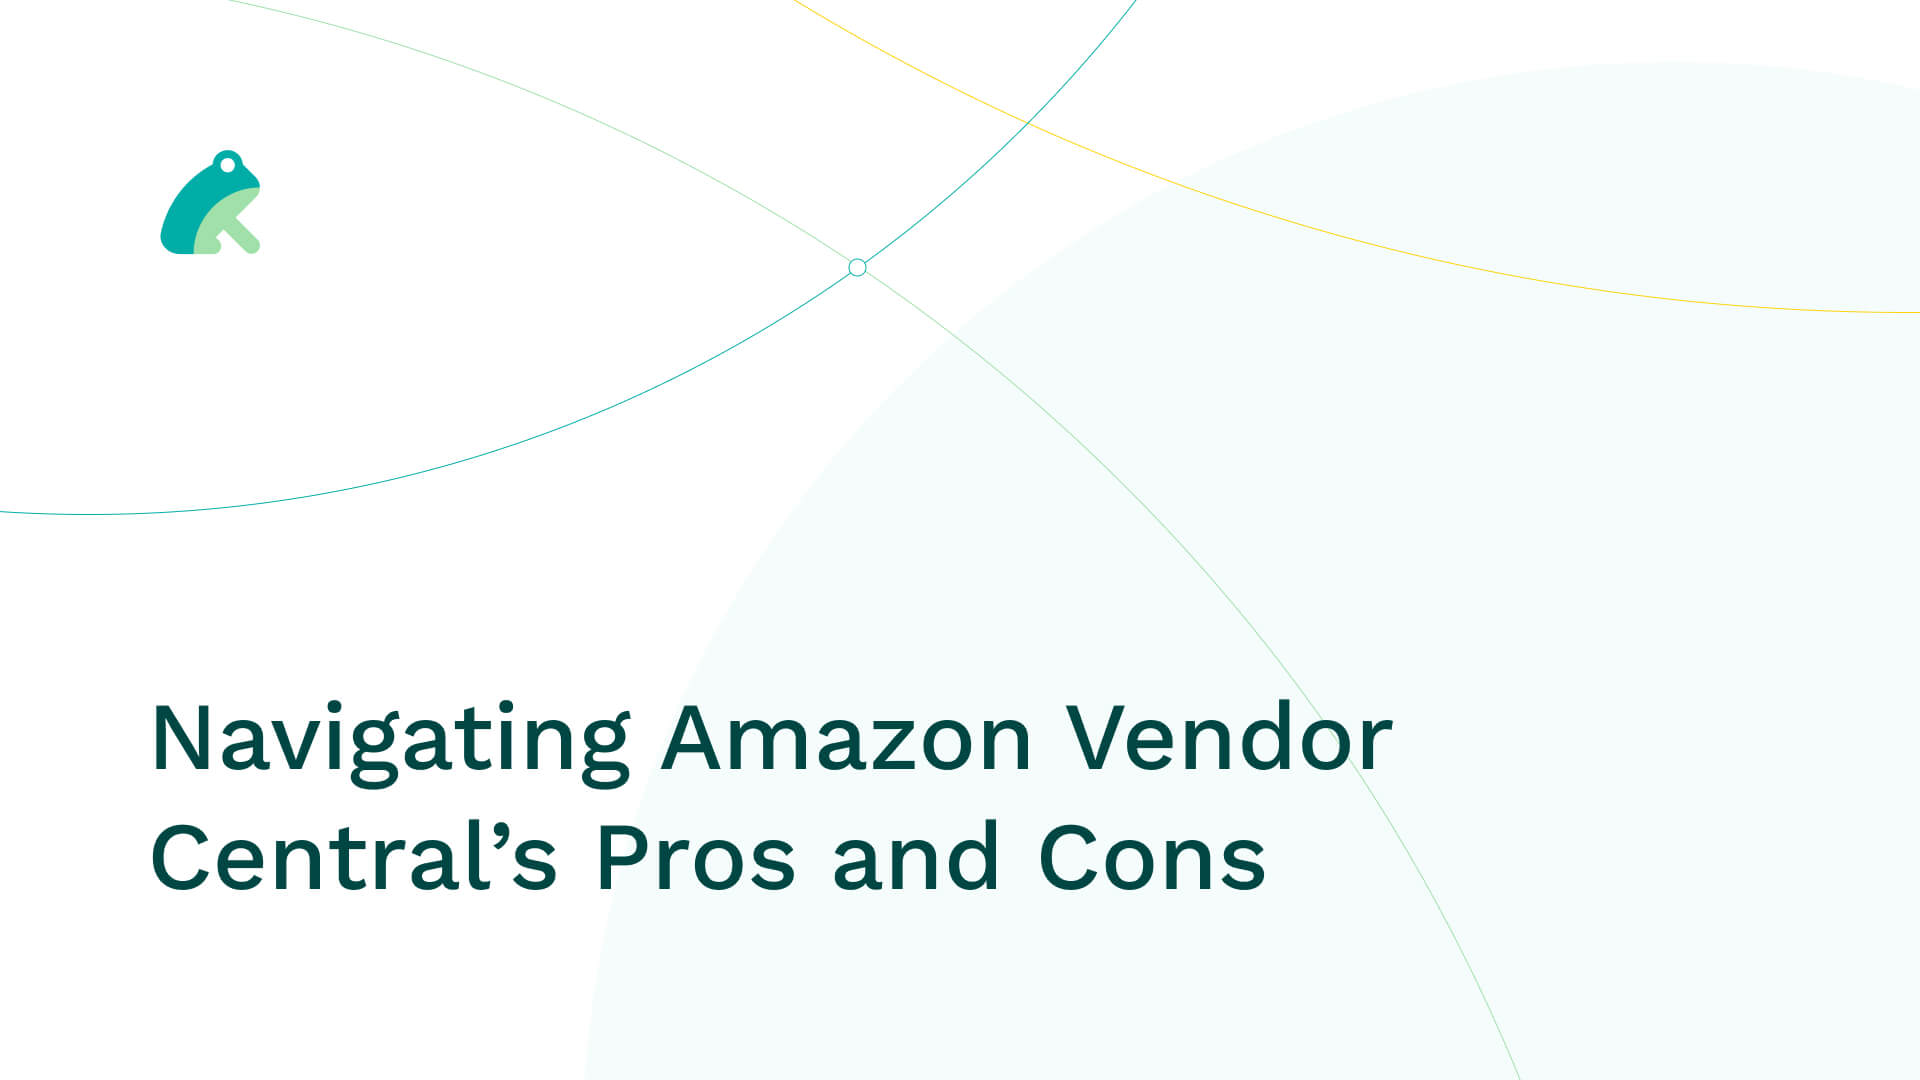 Navigating Amazon Vendor Central’s Pros and Cons